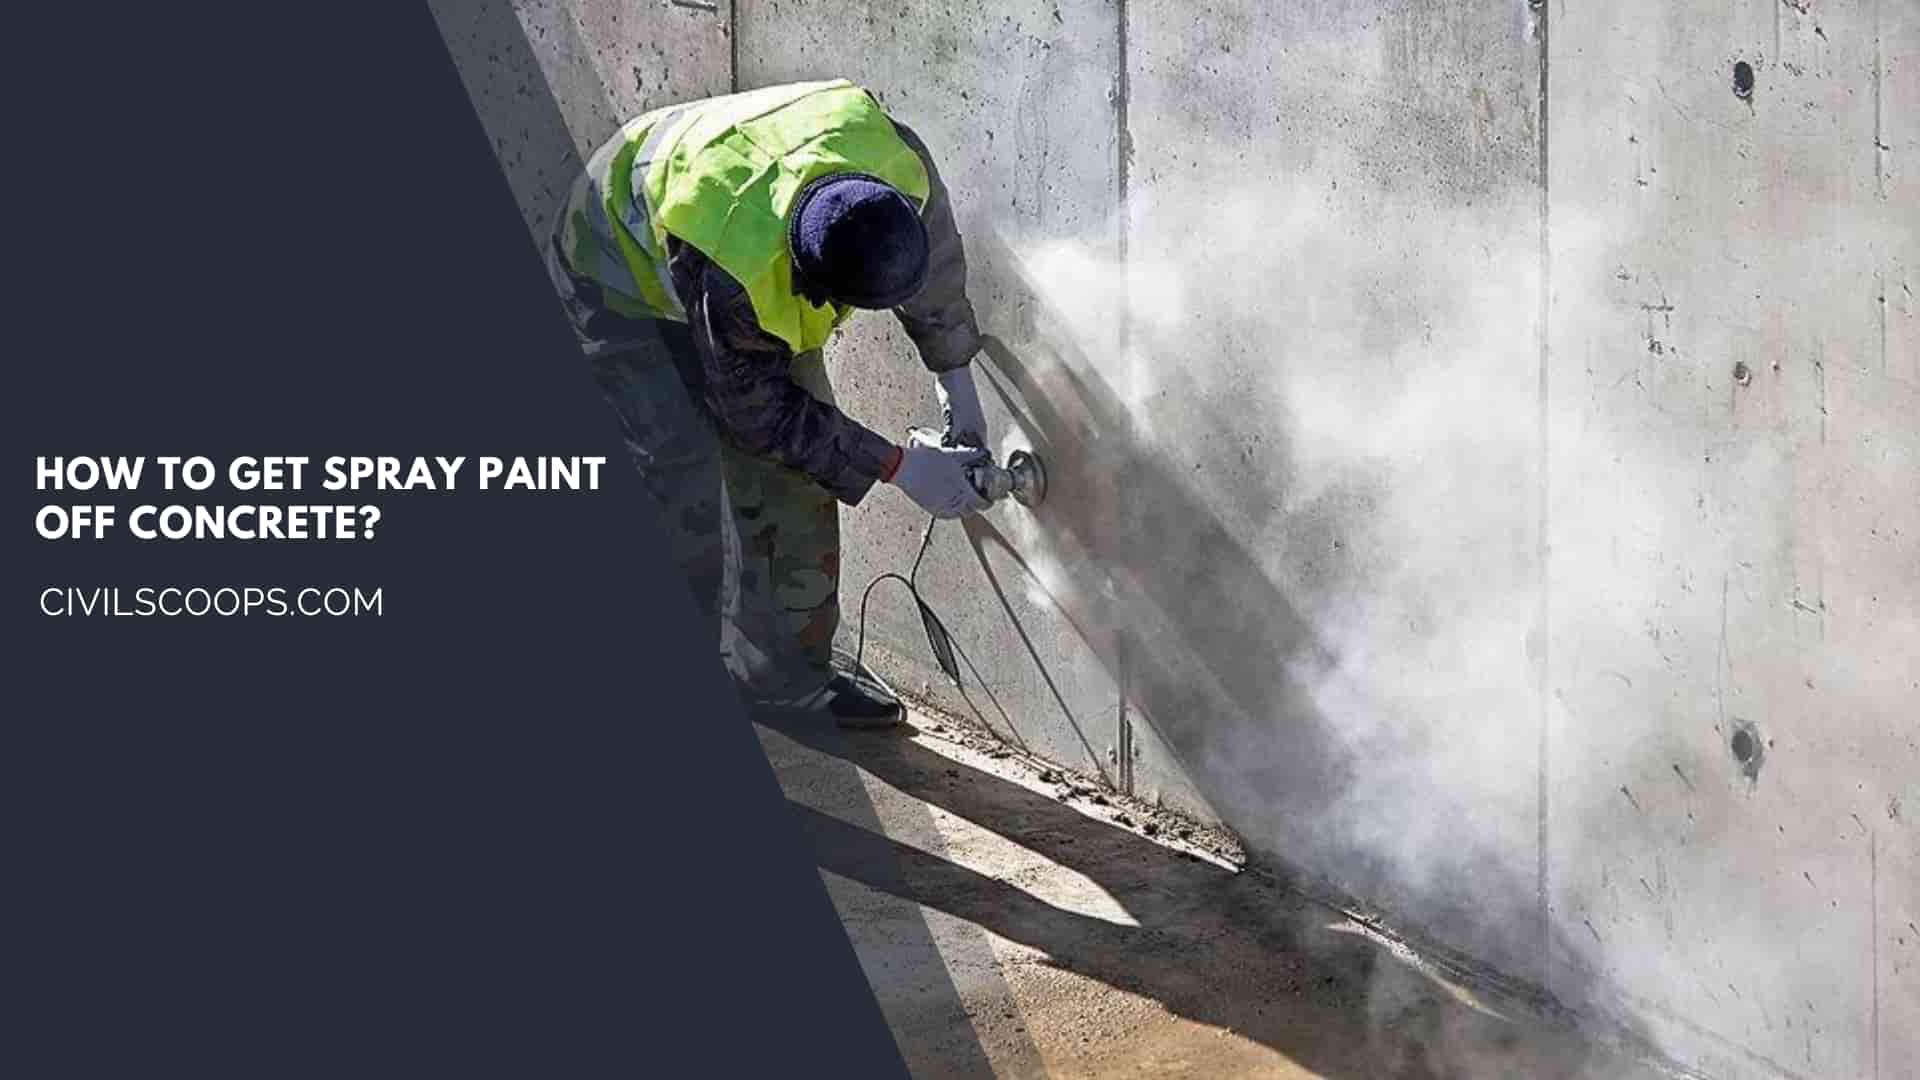 How to Get Spray Paint Off Concrete?